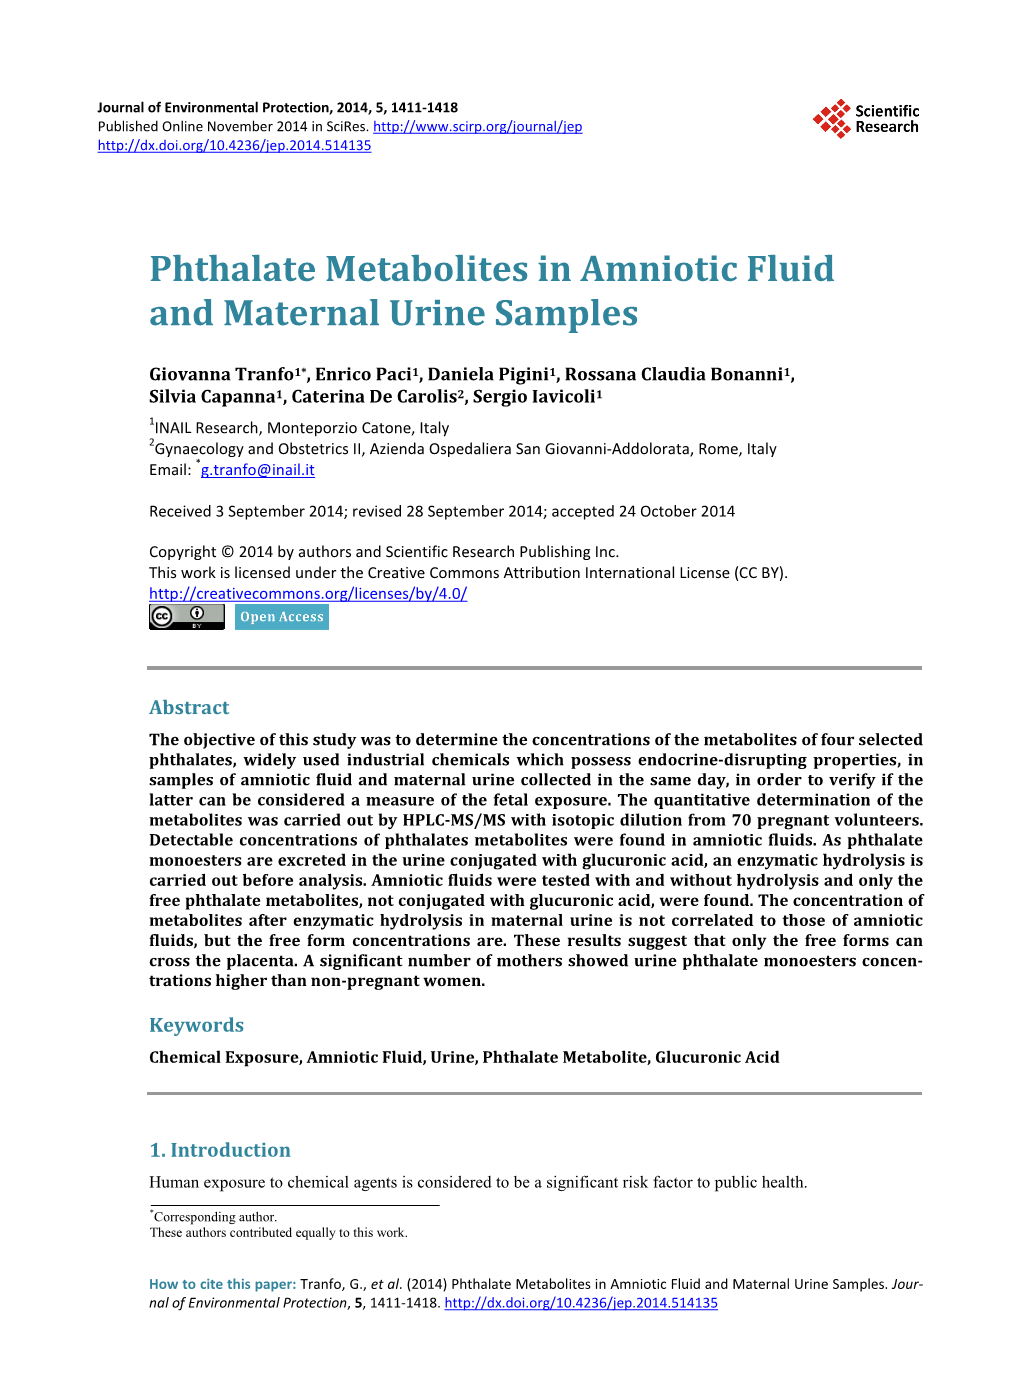 Phthalate Metabolites in Amniotic Fluid and Maternal Urine Samples